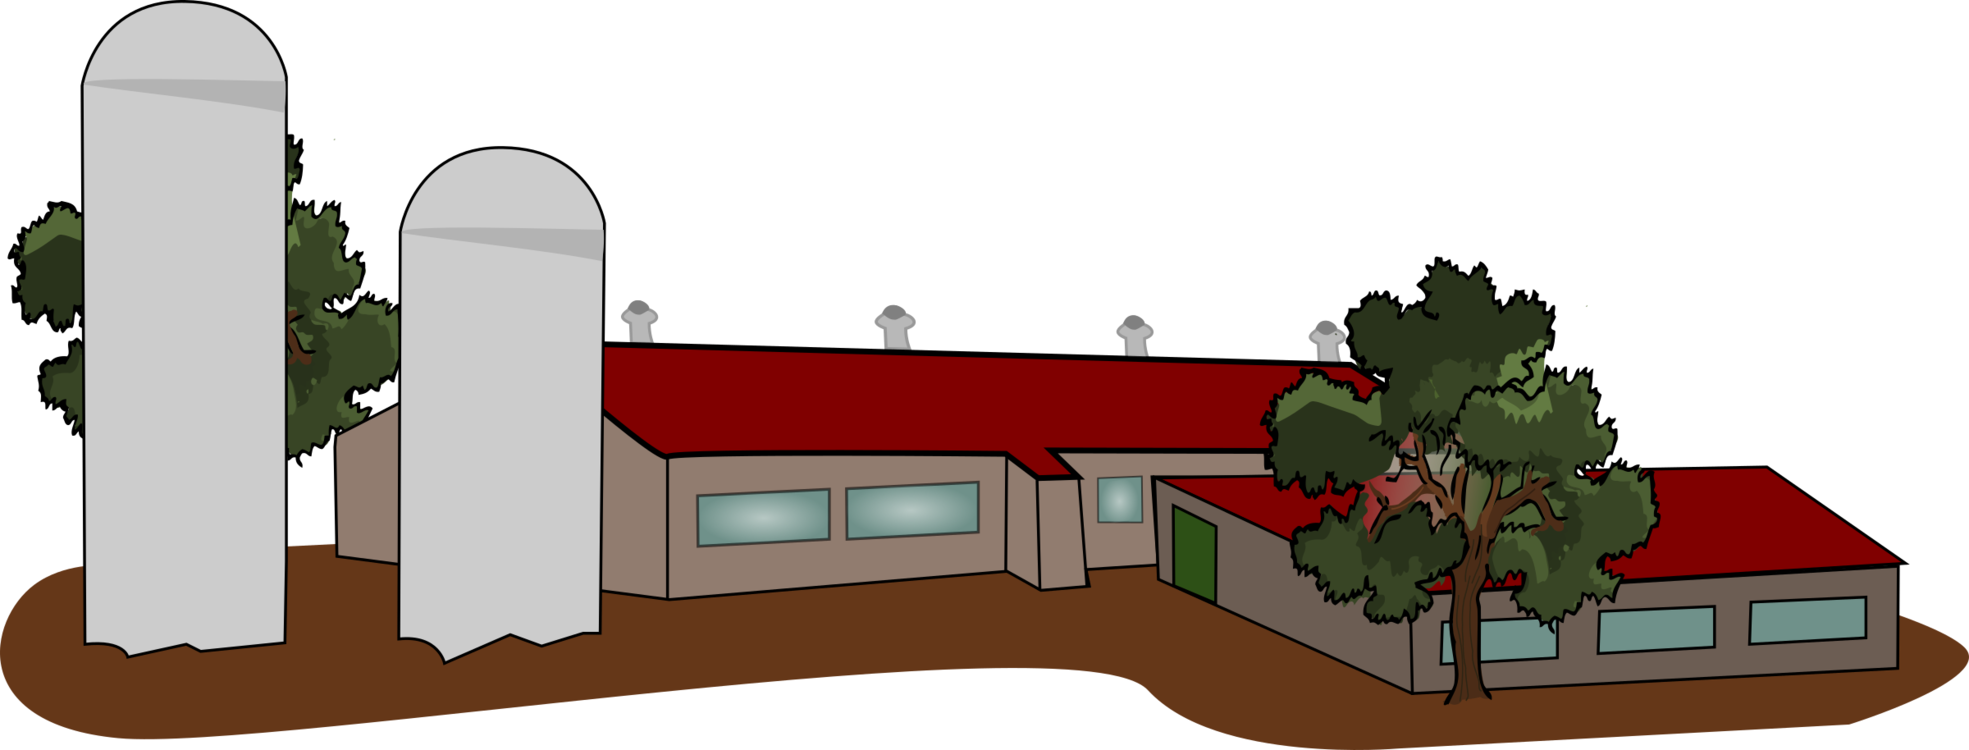 Intensive Animal Farming Agriculture Domestic Pig Barn - Industrial Farm Clipart (1969x750)